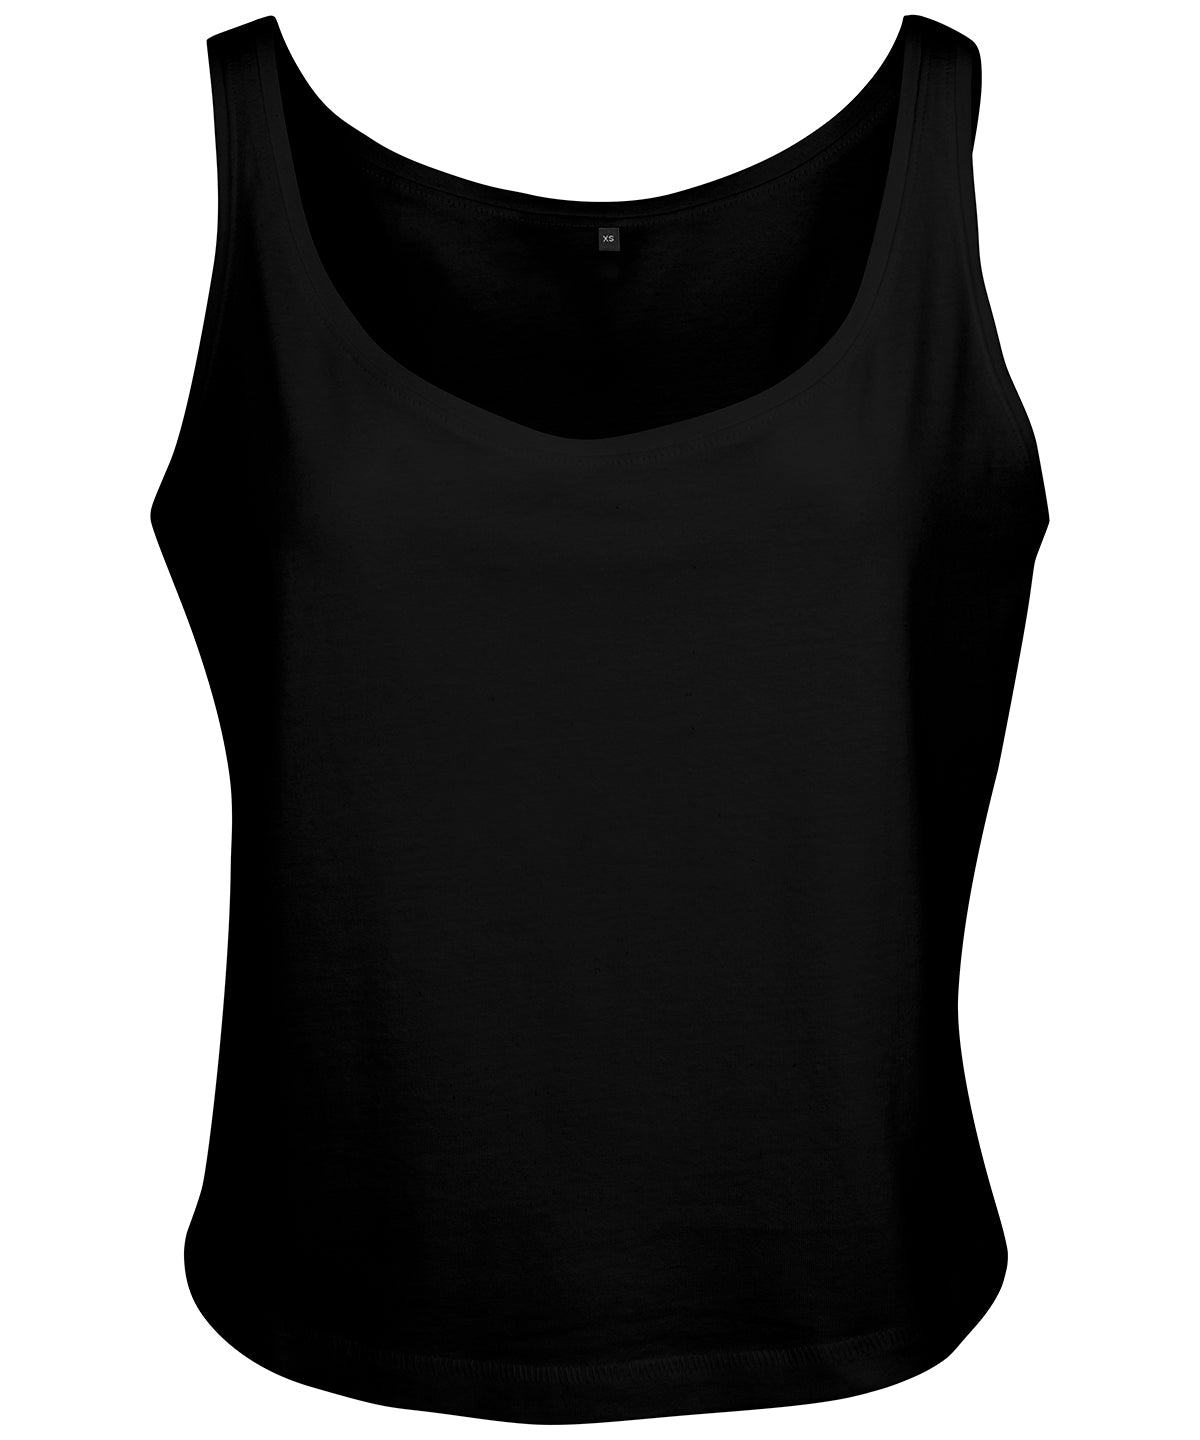 Personalised Vests - Black Build Your Brand Women's oversized tank top